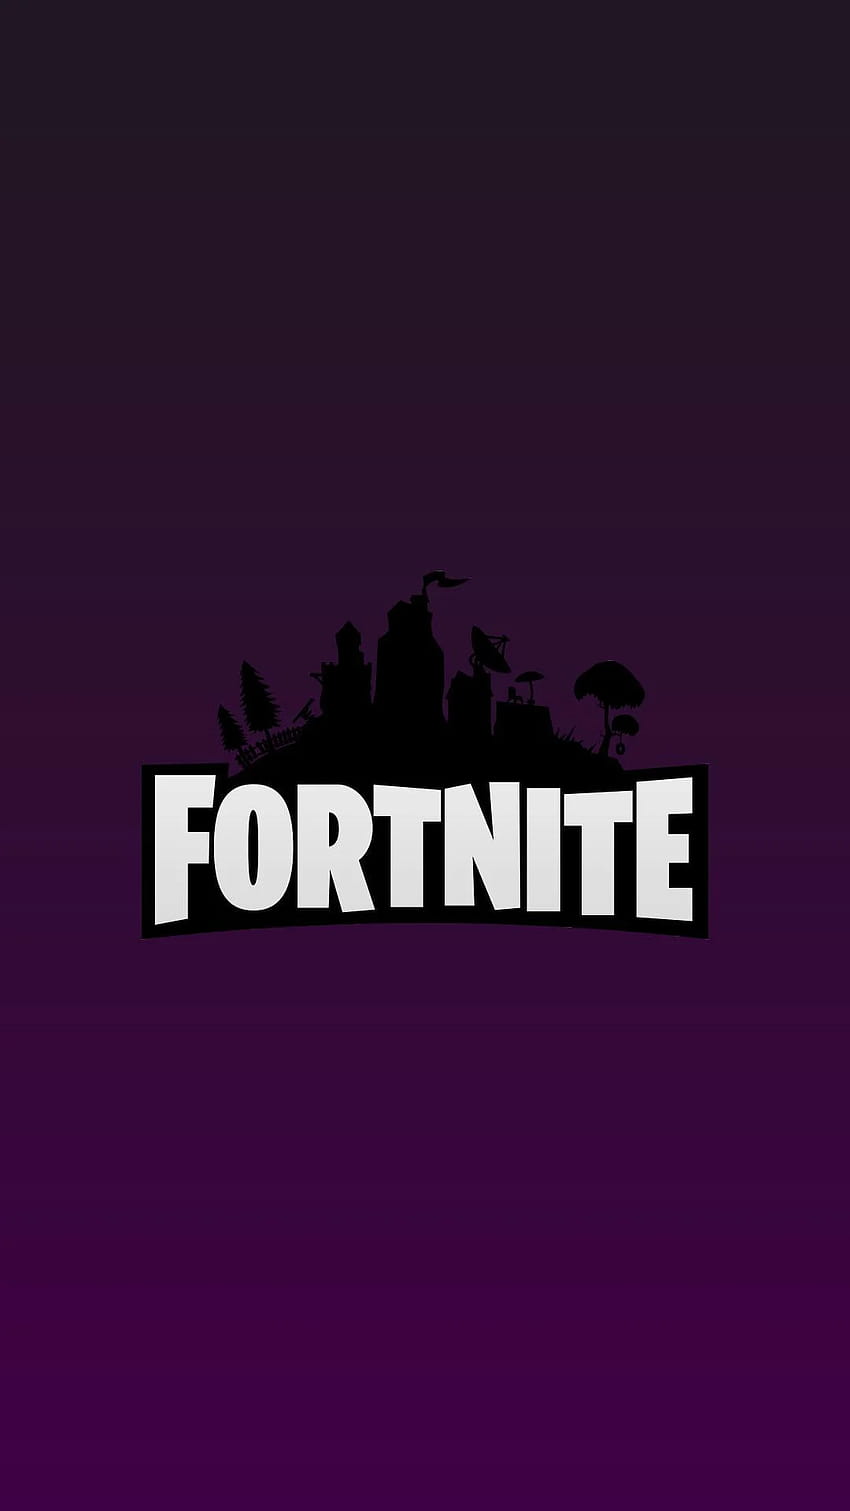 OC] I made This for android phones and Iphones, feel, fortnite season 3 HD phone wallpaper